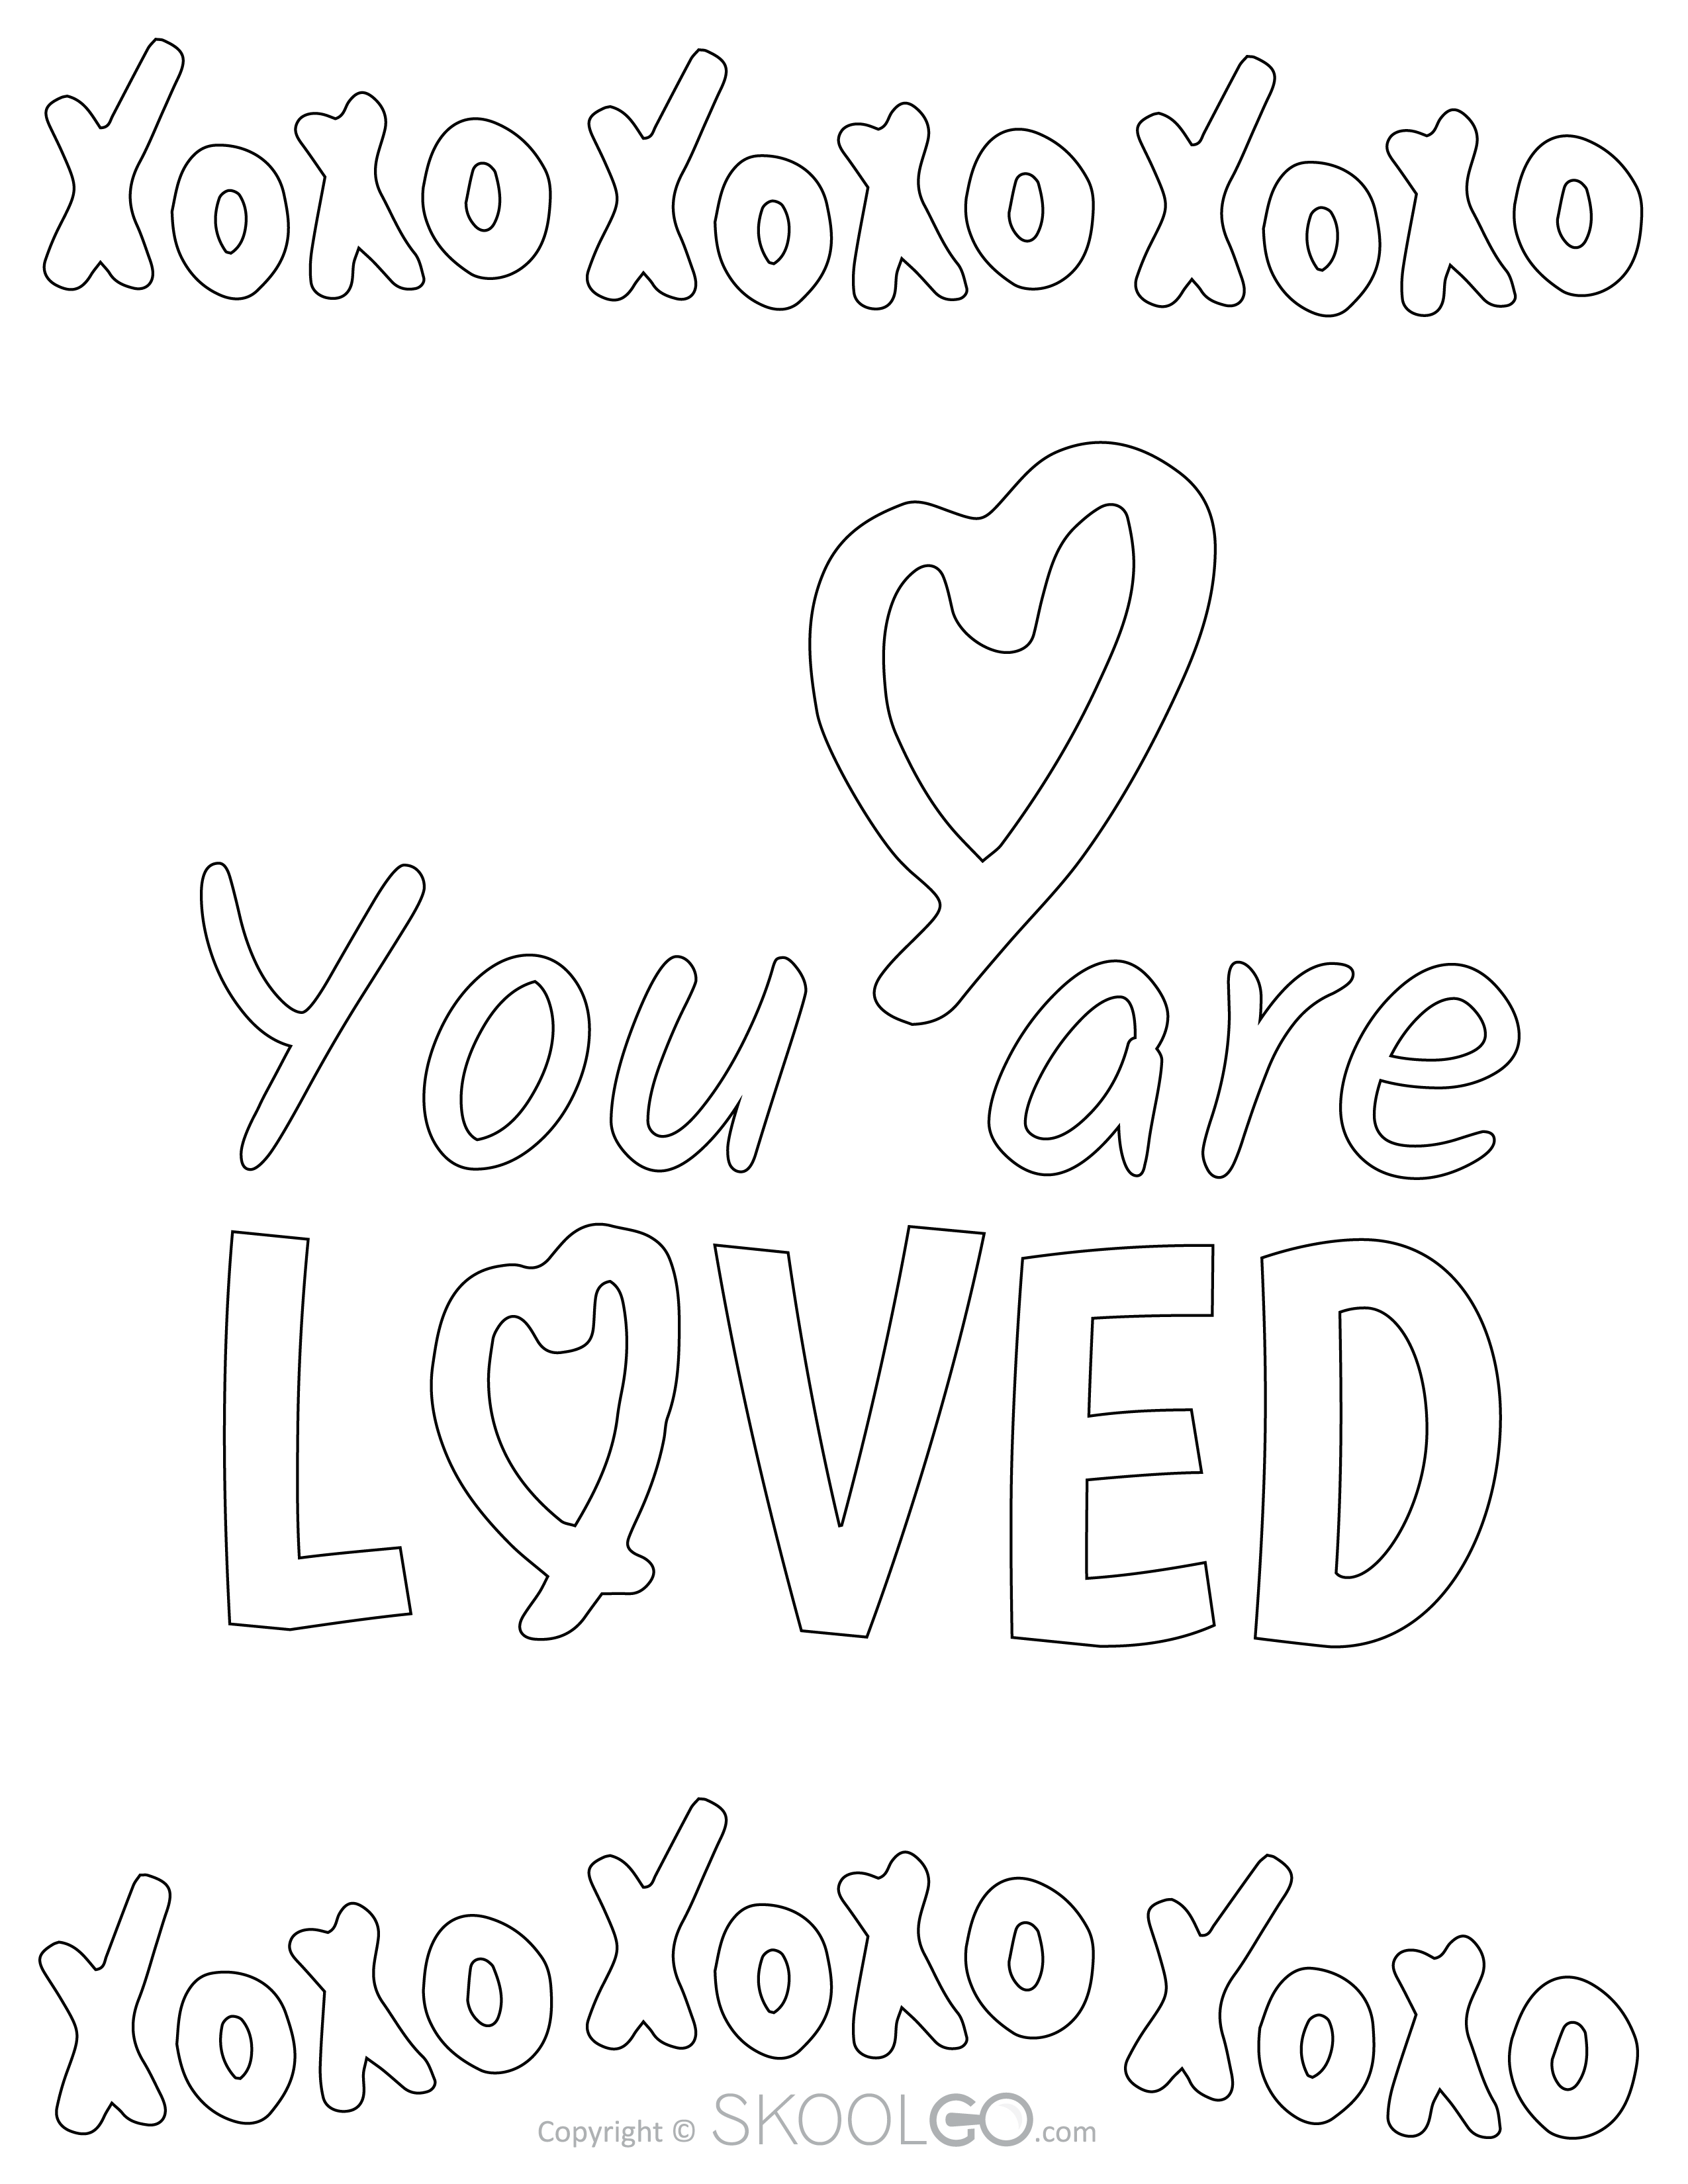 You Are Loved - Free Coloring Version Poster